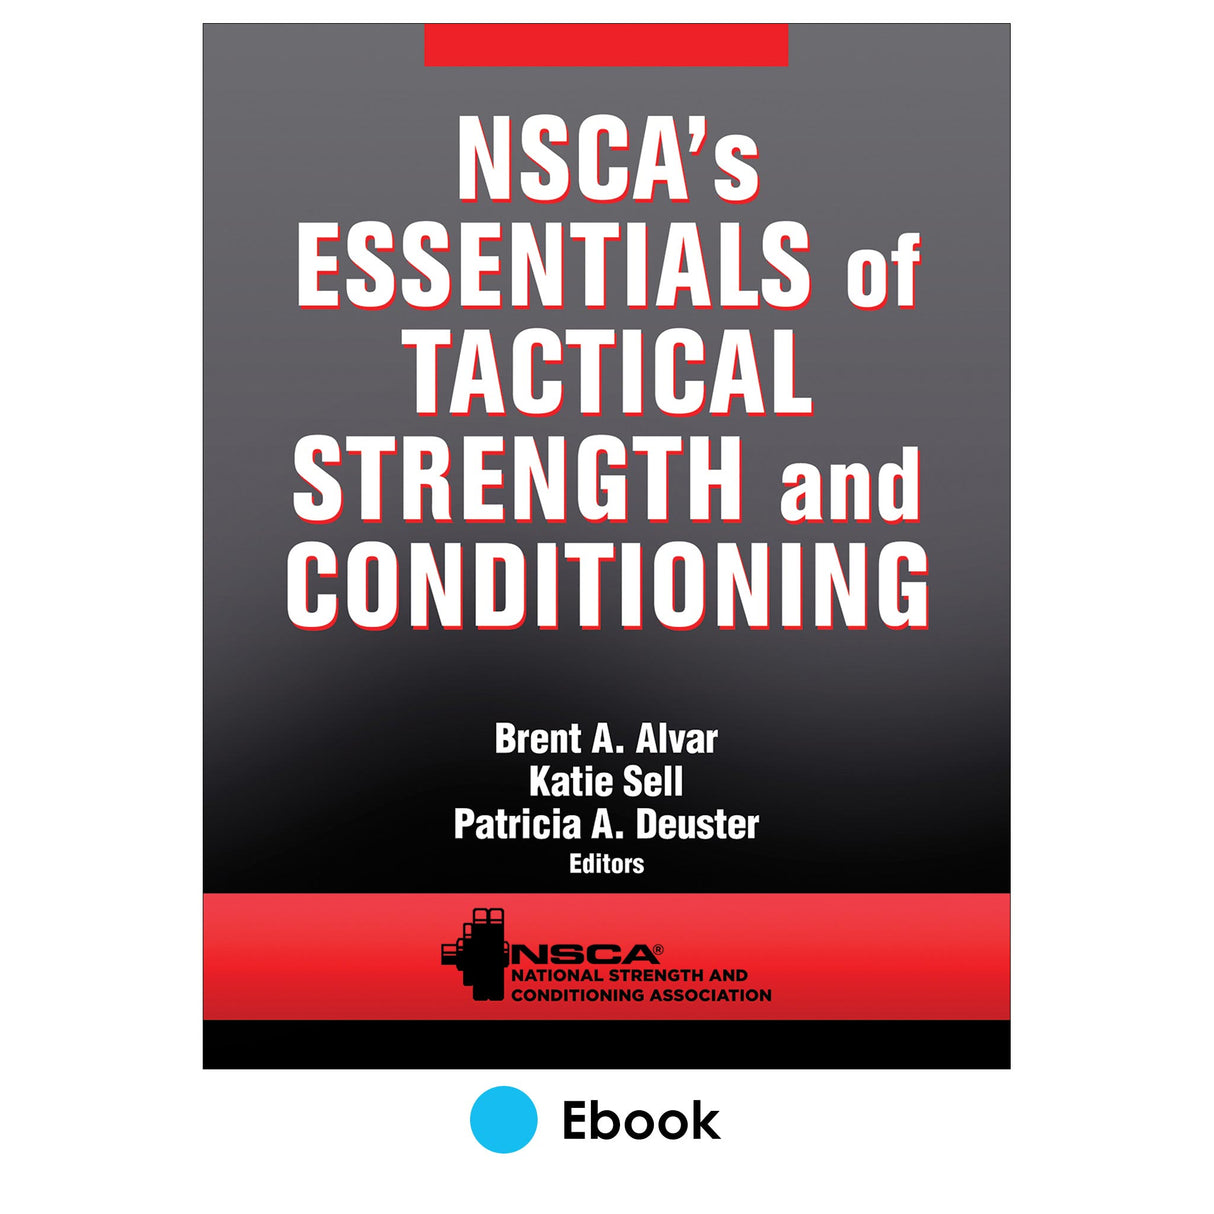 NSCA's Essentials of Tactical Strength and Conditioning PDF